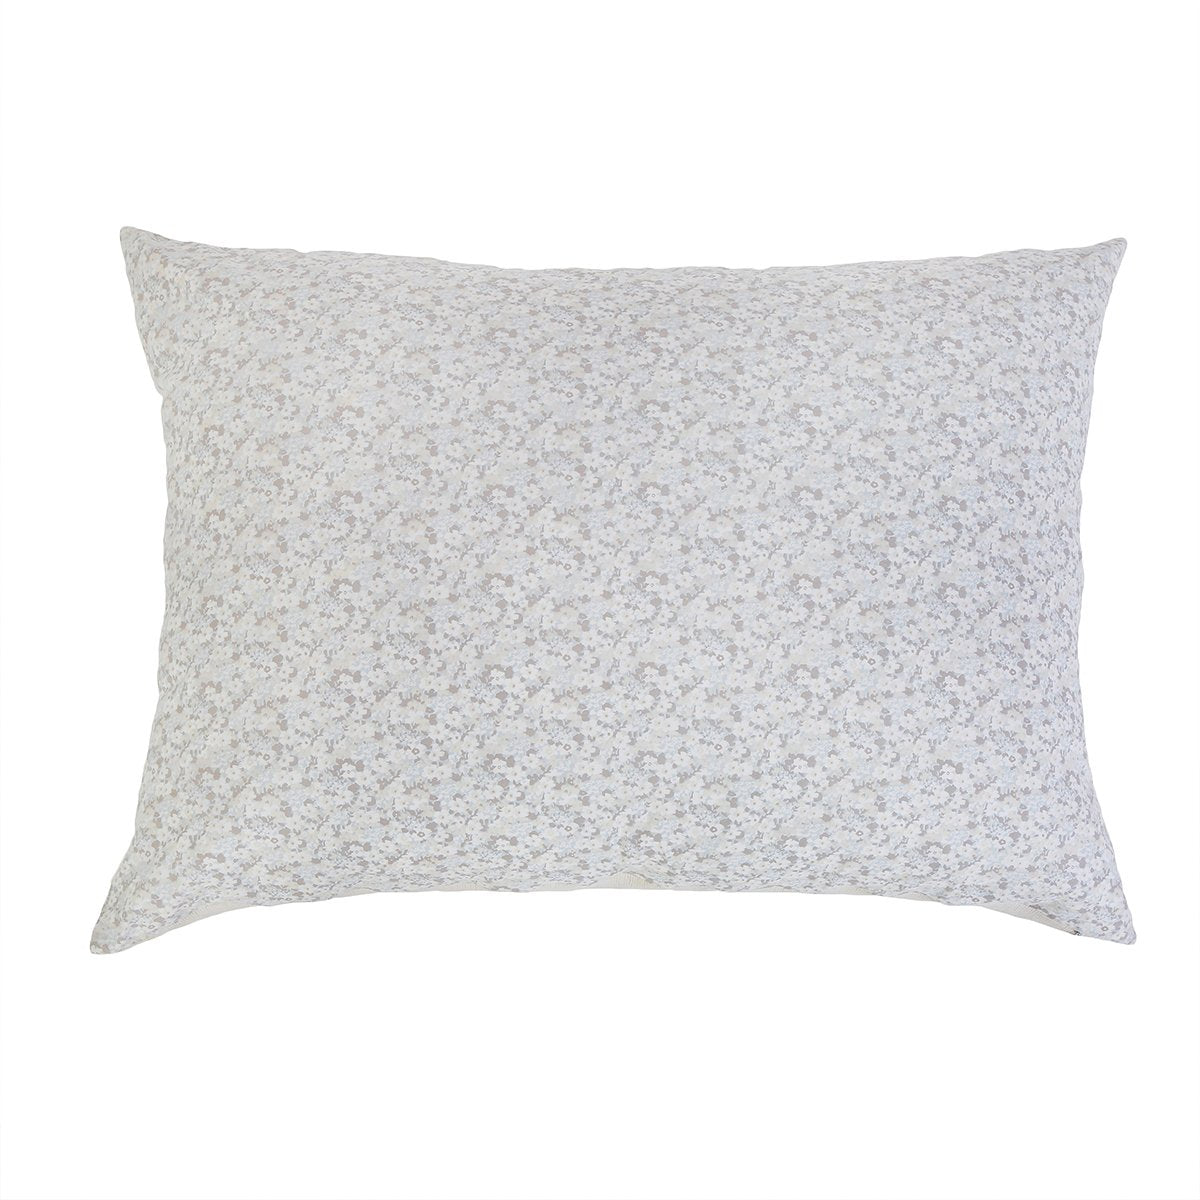 JUNE BIG PILLOW 28&quot; X 36&quot; WITH INSERT-Pom Pom at Home